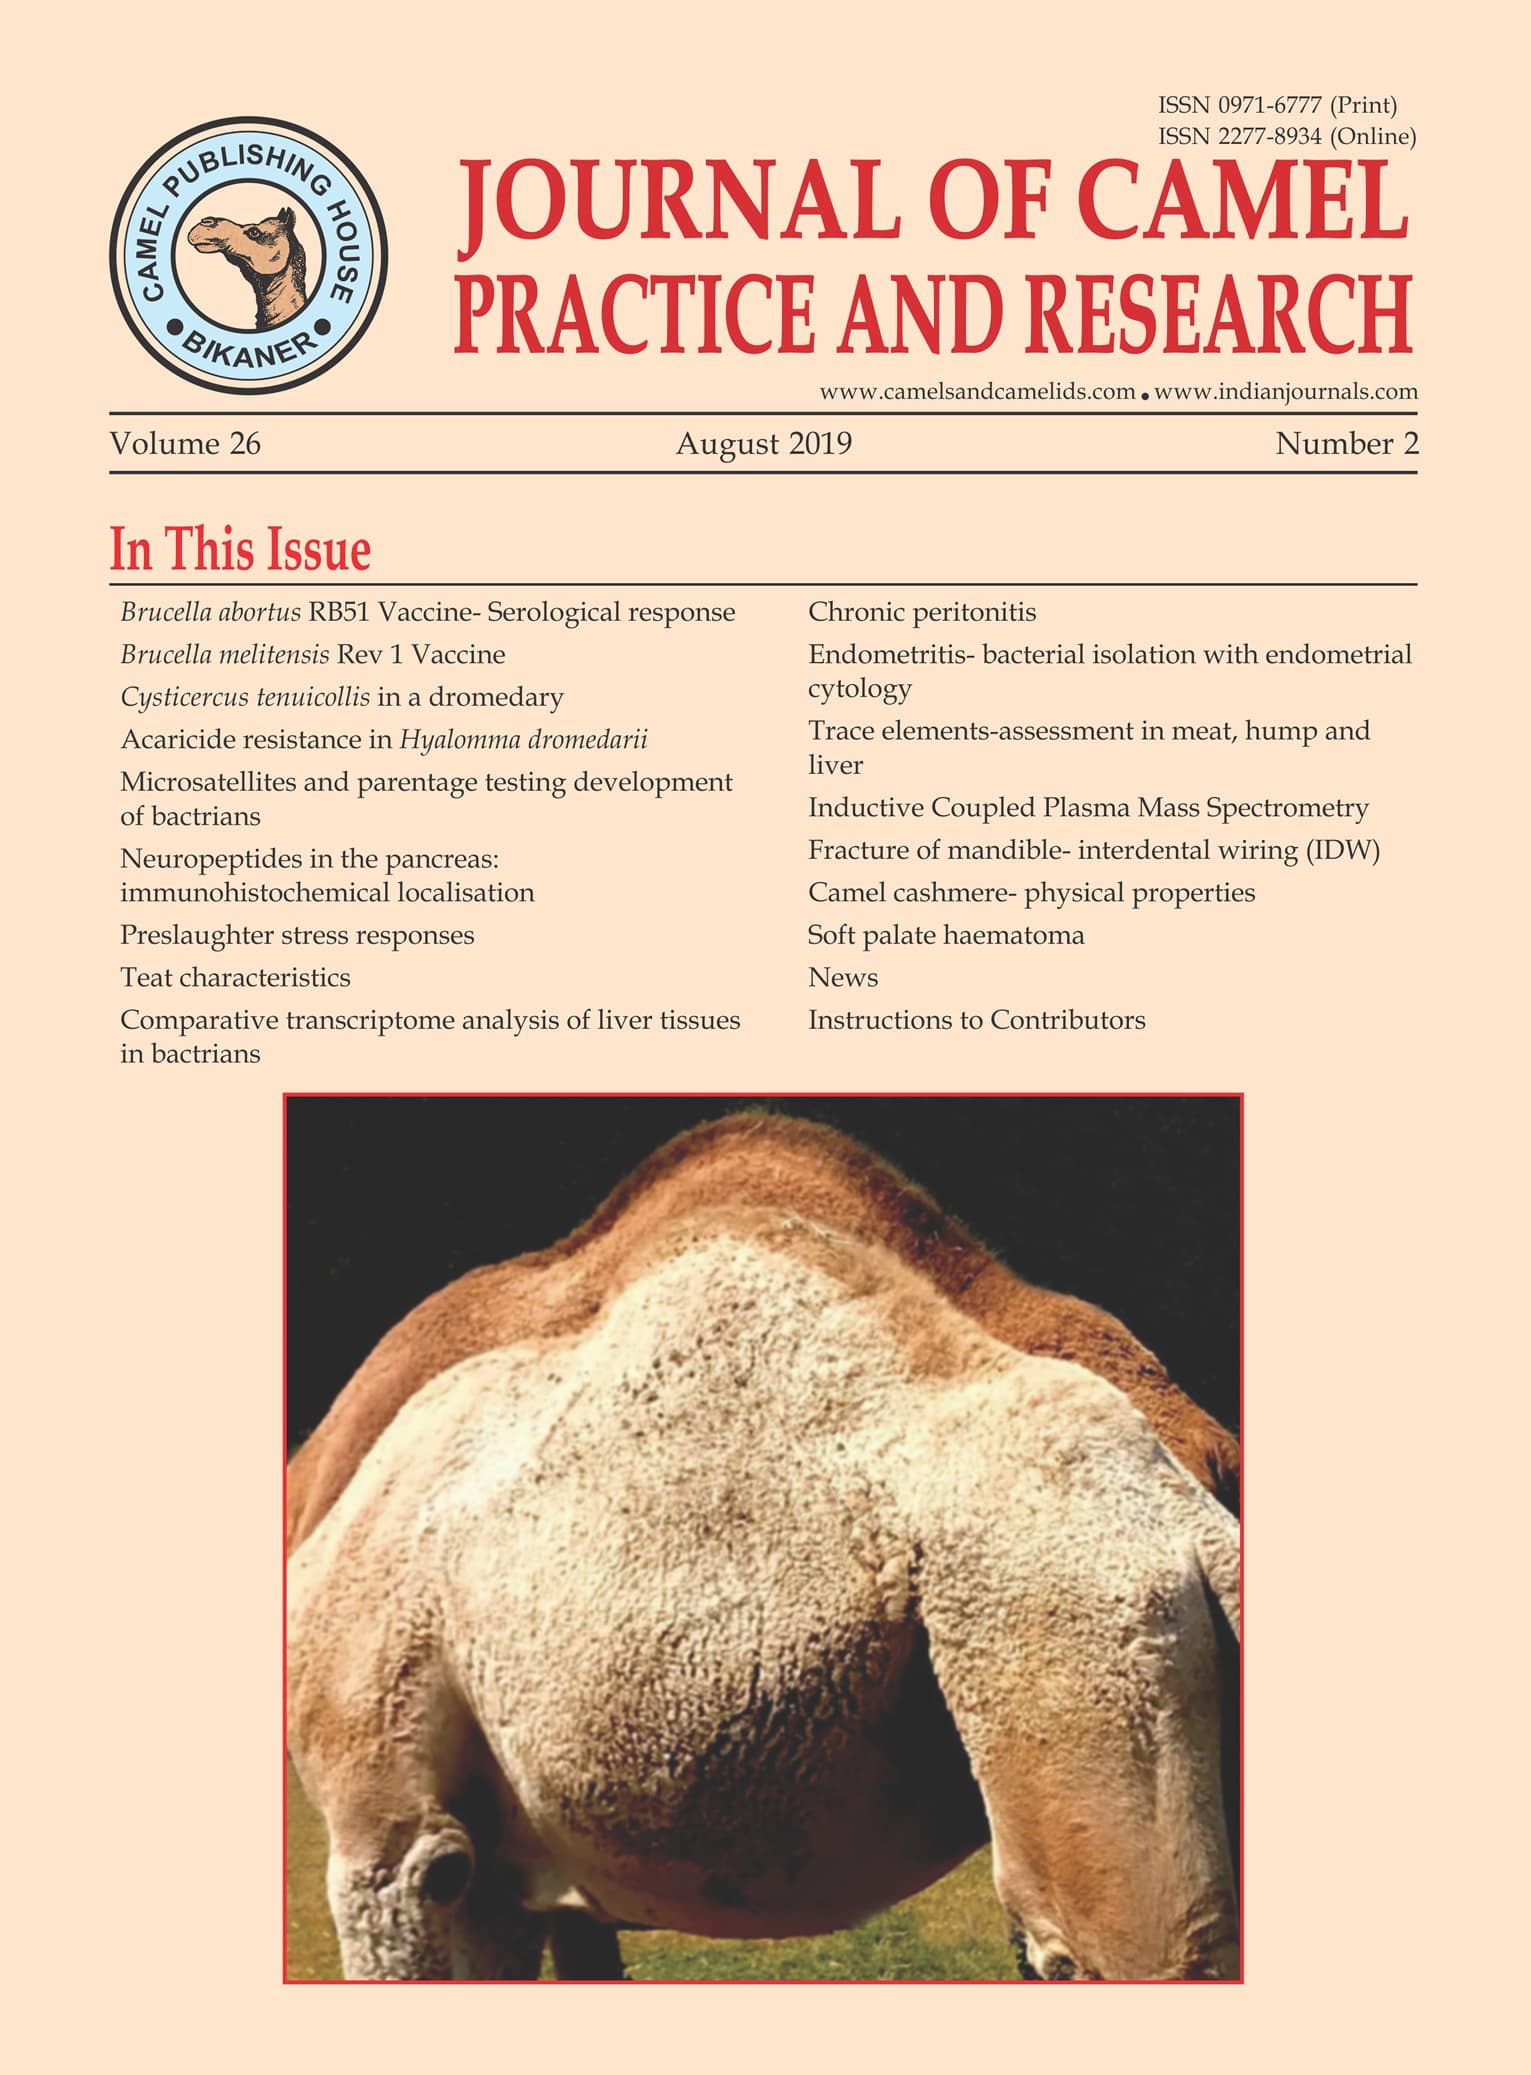 Camel Crazy featured in the Journal of Camel Practice and Research, 2019.